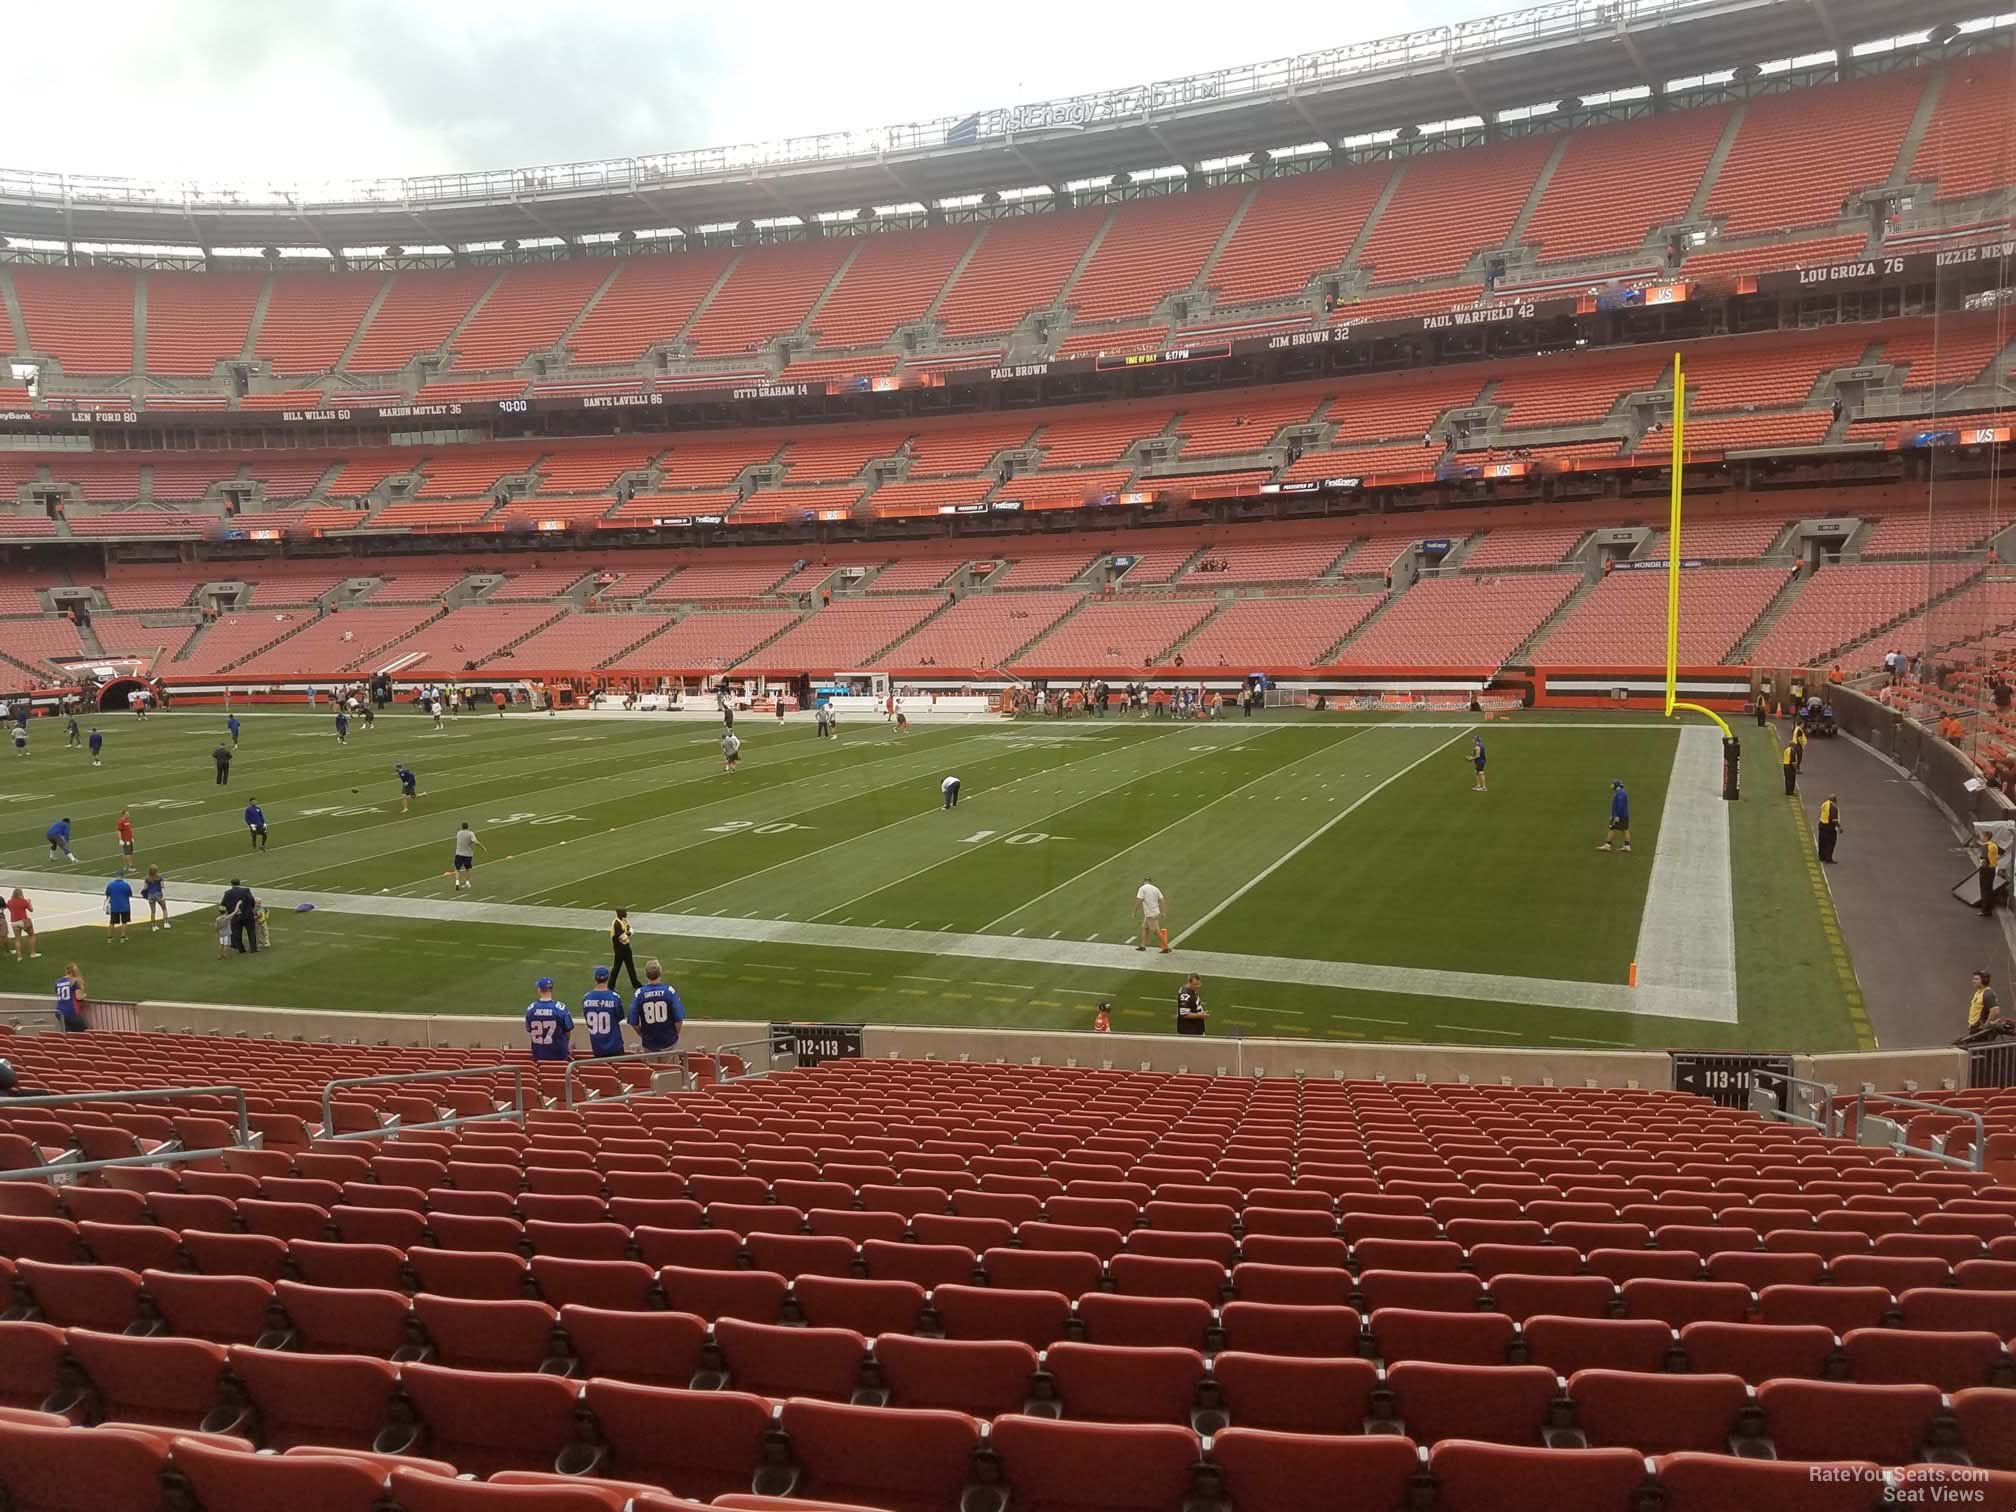 section 113, row 24 seat view  - cleveland browns stadium